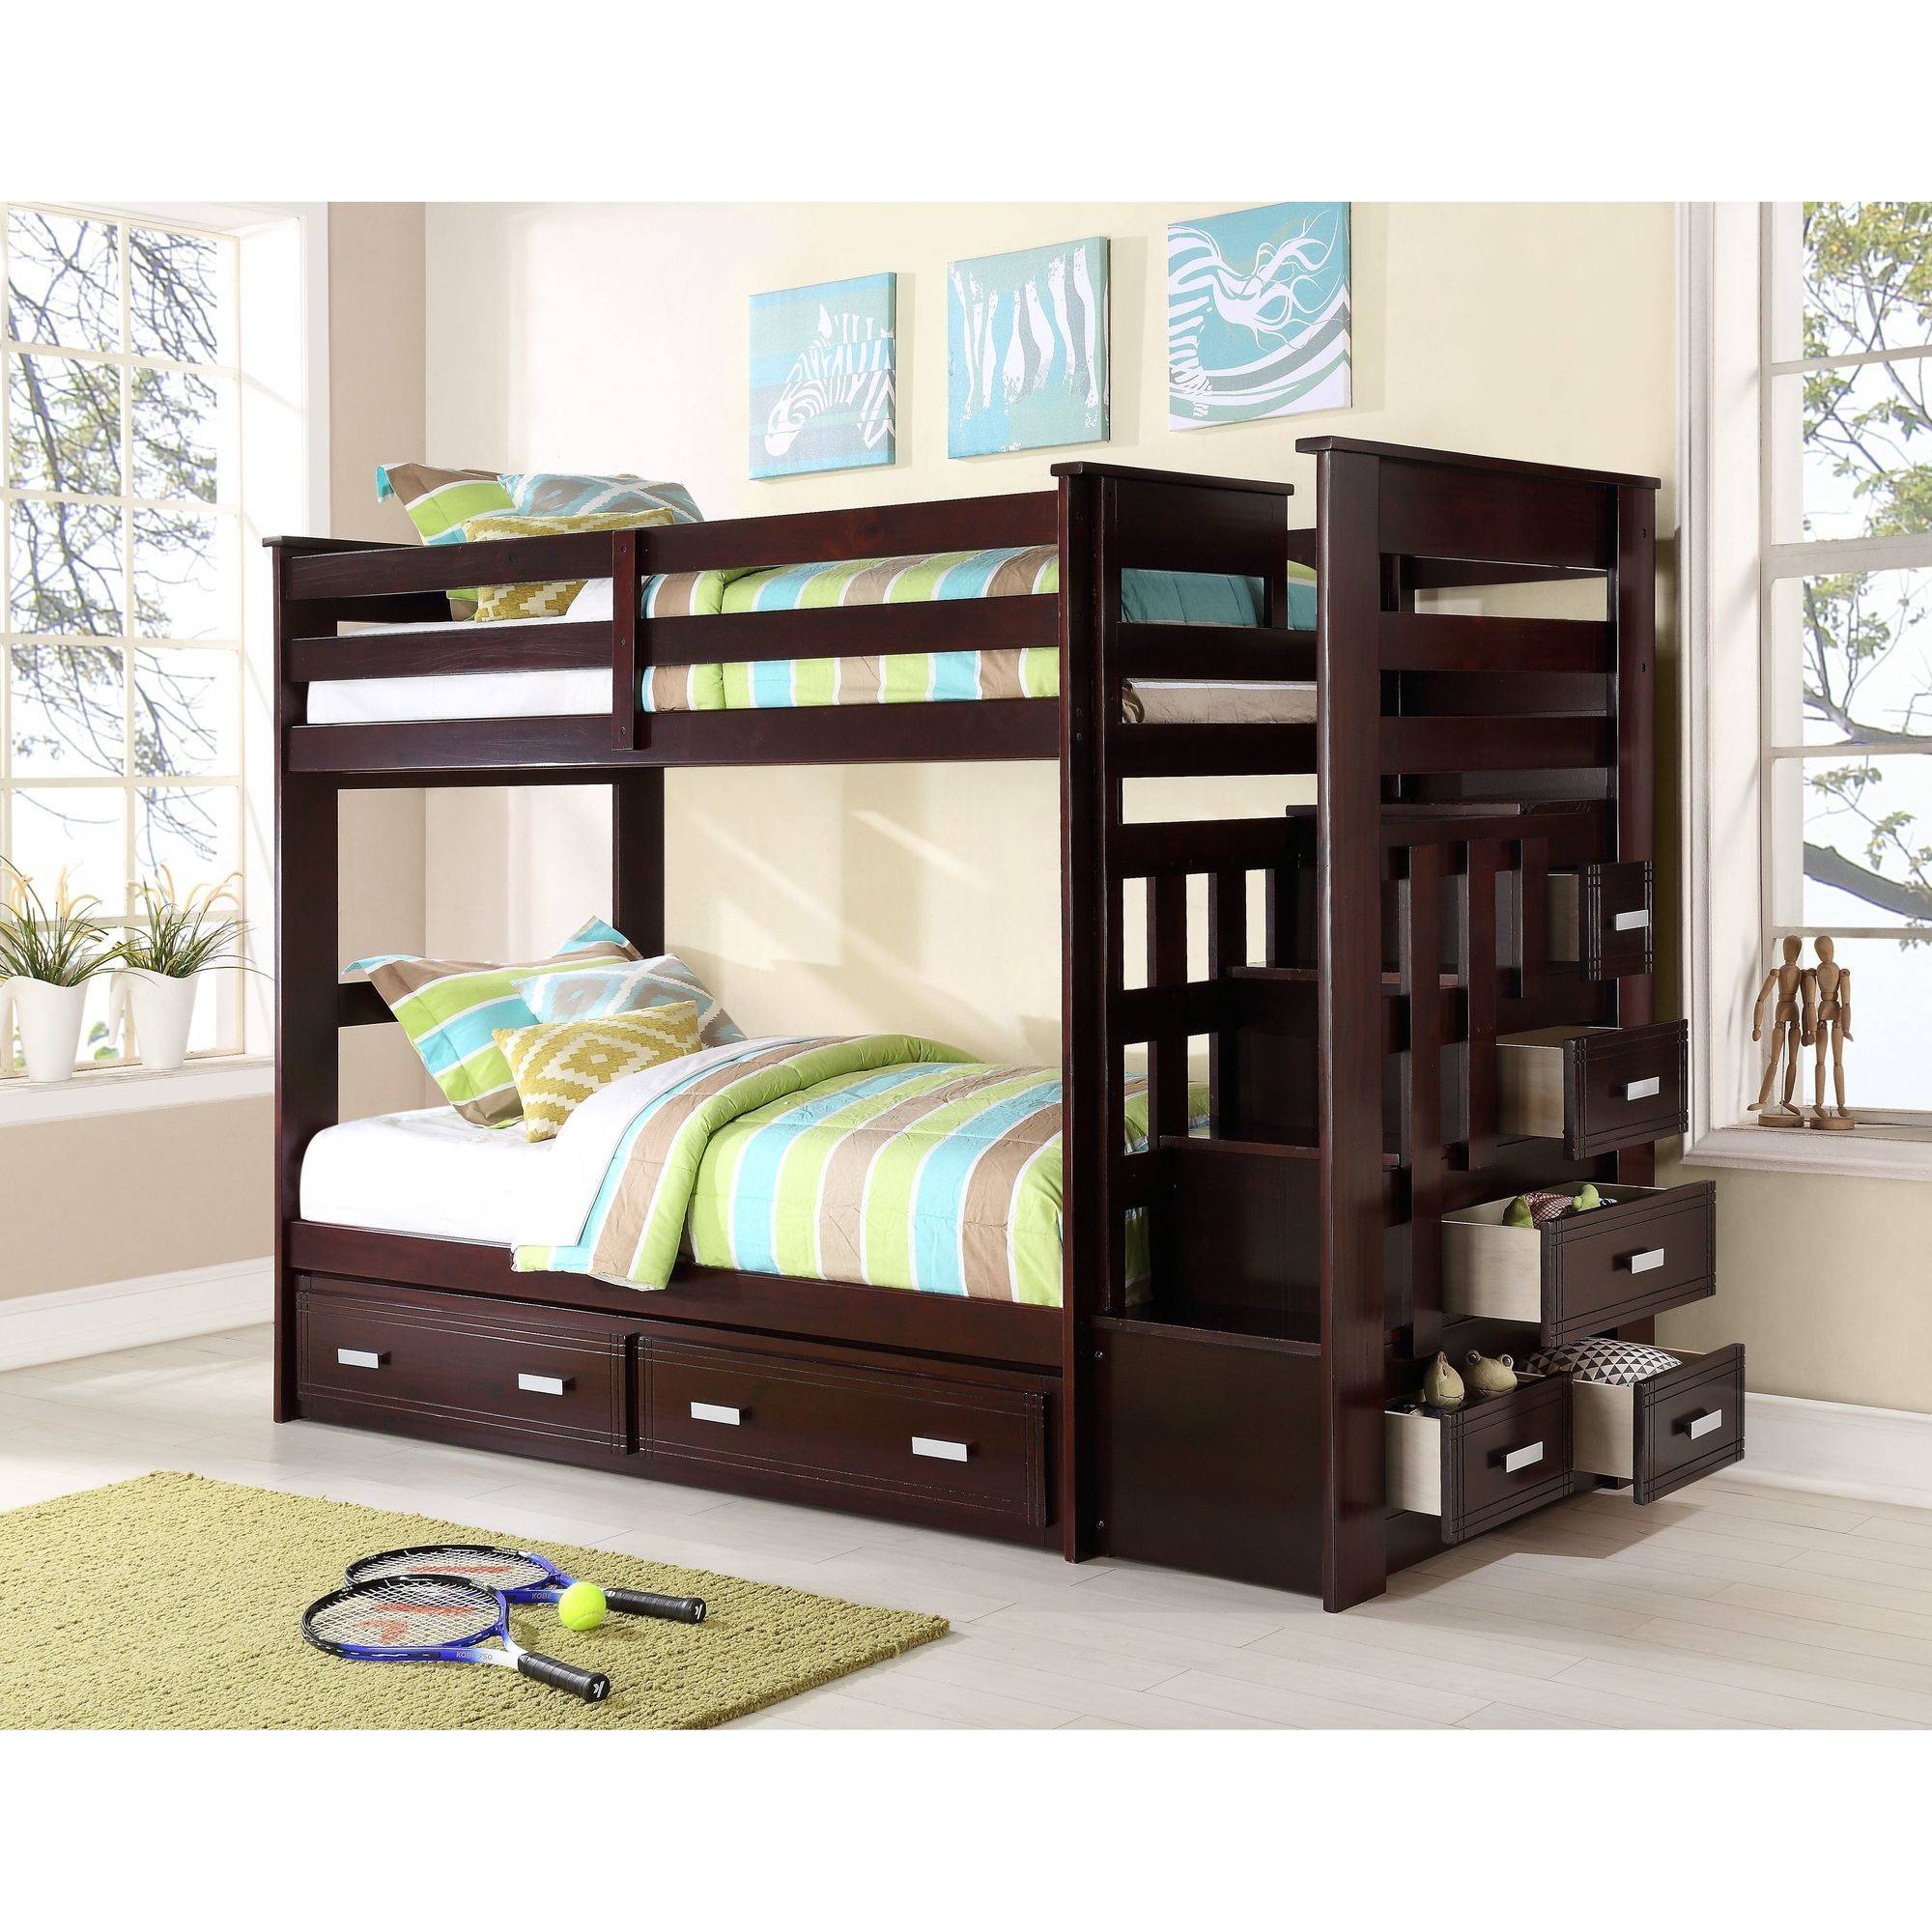 Acme Furniture Allentown Twin Over Twin Wood Bunk Bed with Storage, Espresso - image 4 of 7